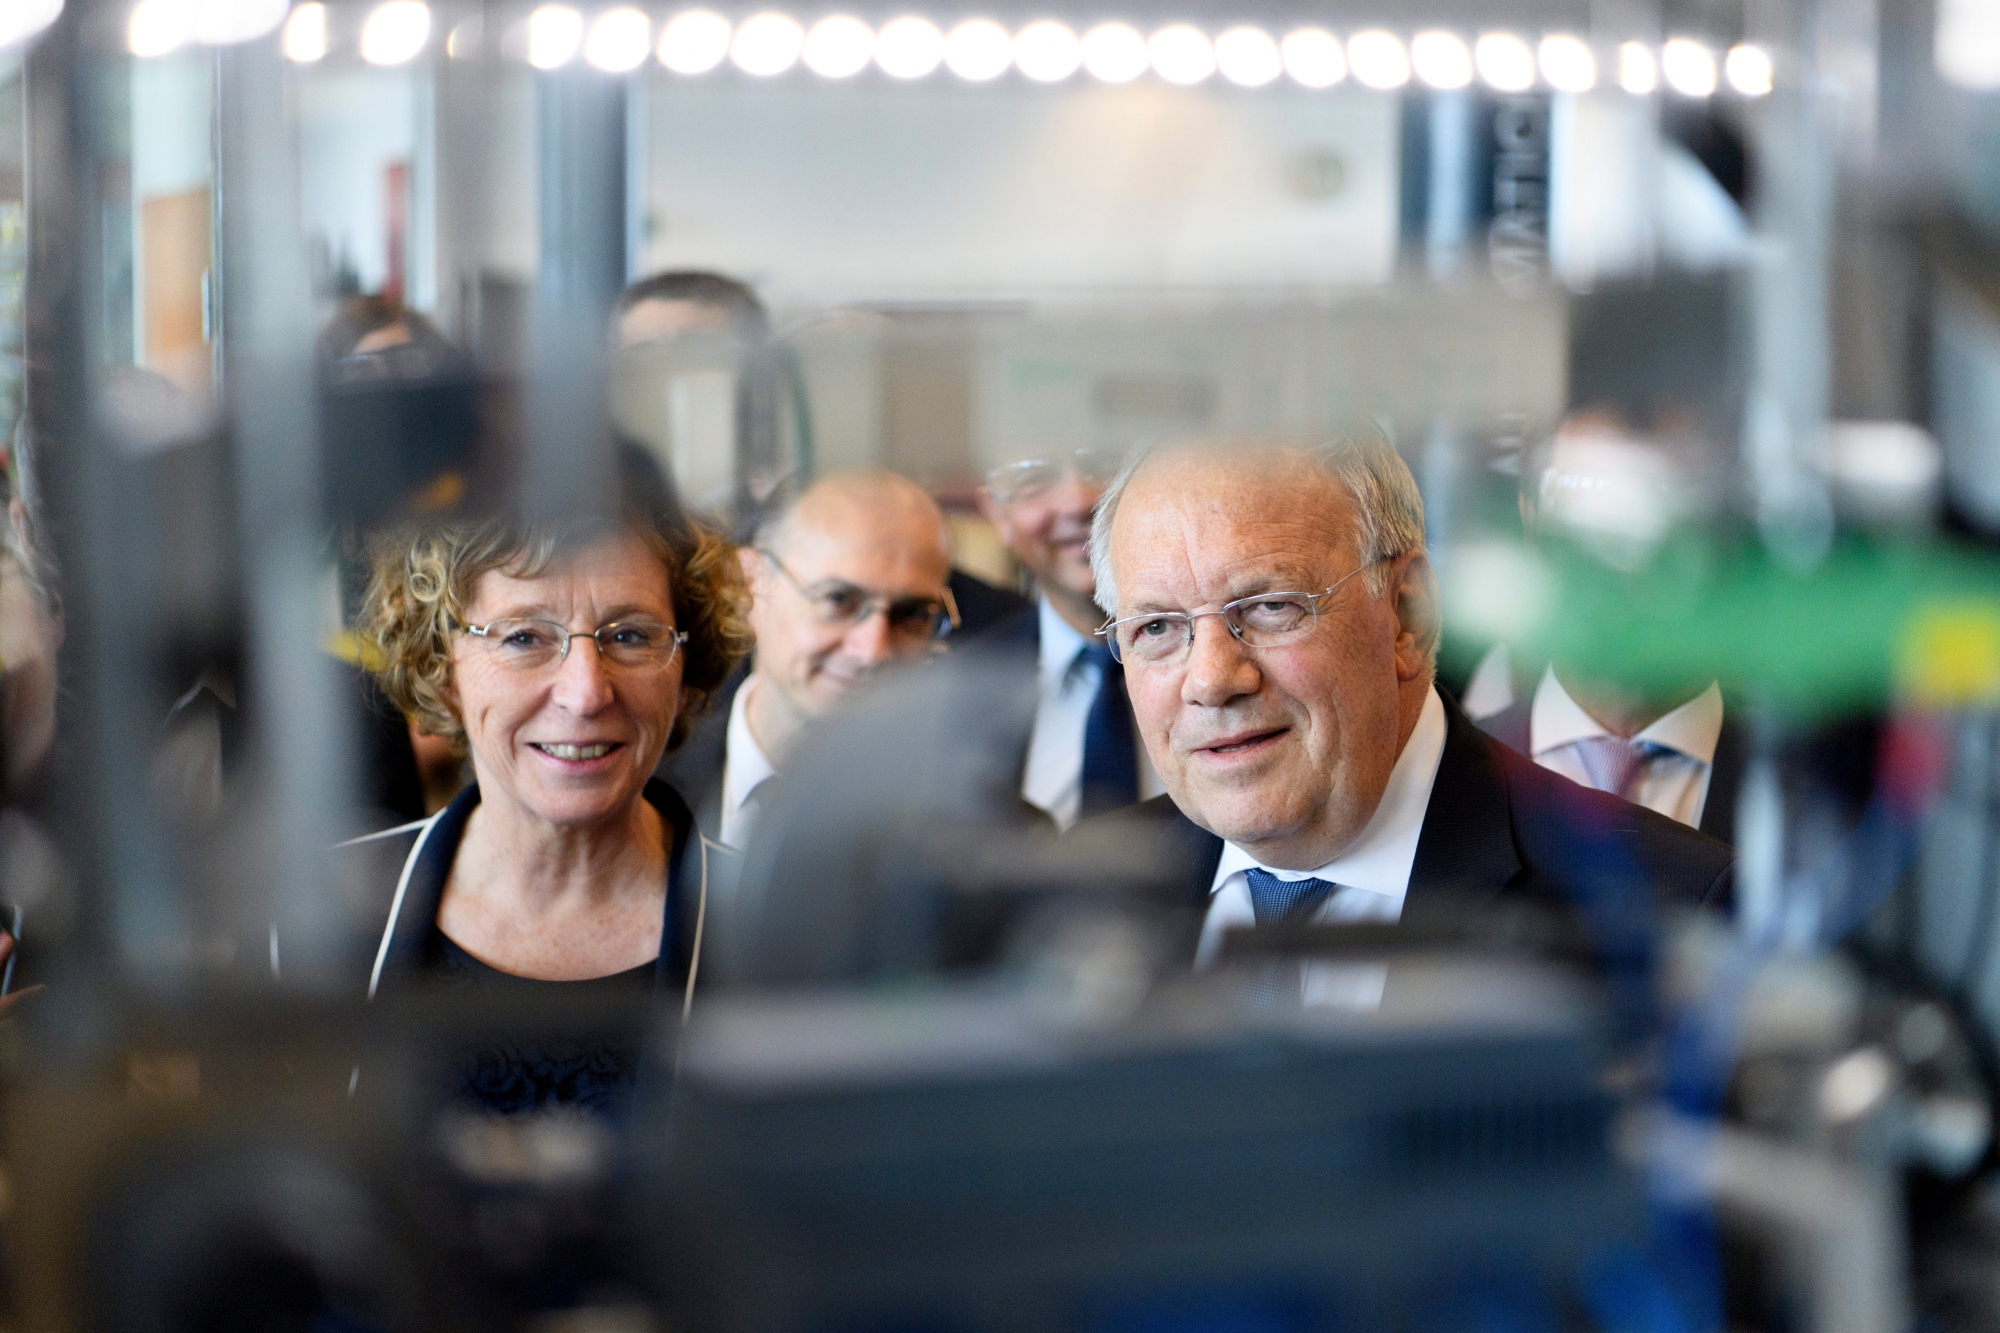 Swiss Federal Councillor Johann Schneider-Ammann, left, speaks with French Labour Minister Muriel Penicaud, center, as they visit the Bobst Learning Center, the world's leading suppliers of equipment and services to packaging and label manufacturers in the folding carton, corrugated board and flexible materials industries, in Mex, Switzerland, Thursday, October 26, 2017. (KEYSTONE/Laurent Gillieron) SWITZERLAND FRANCE BOBST LEARNING